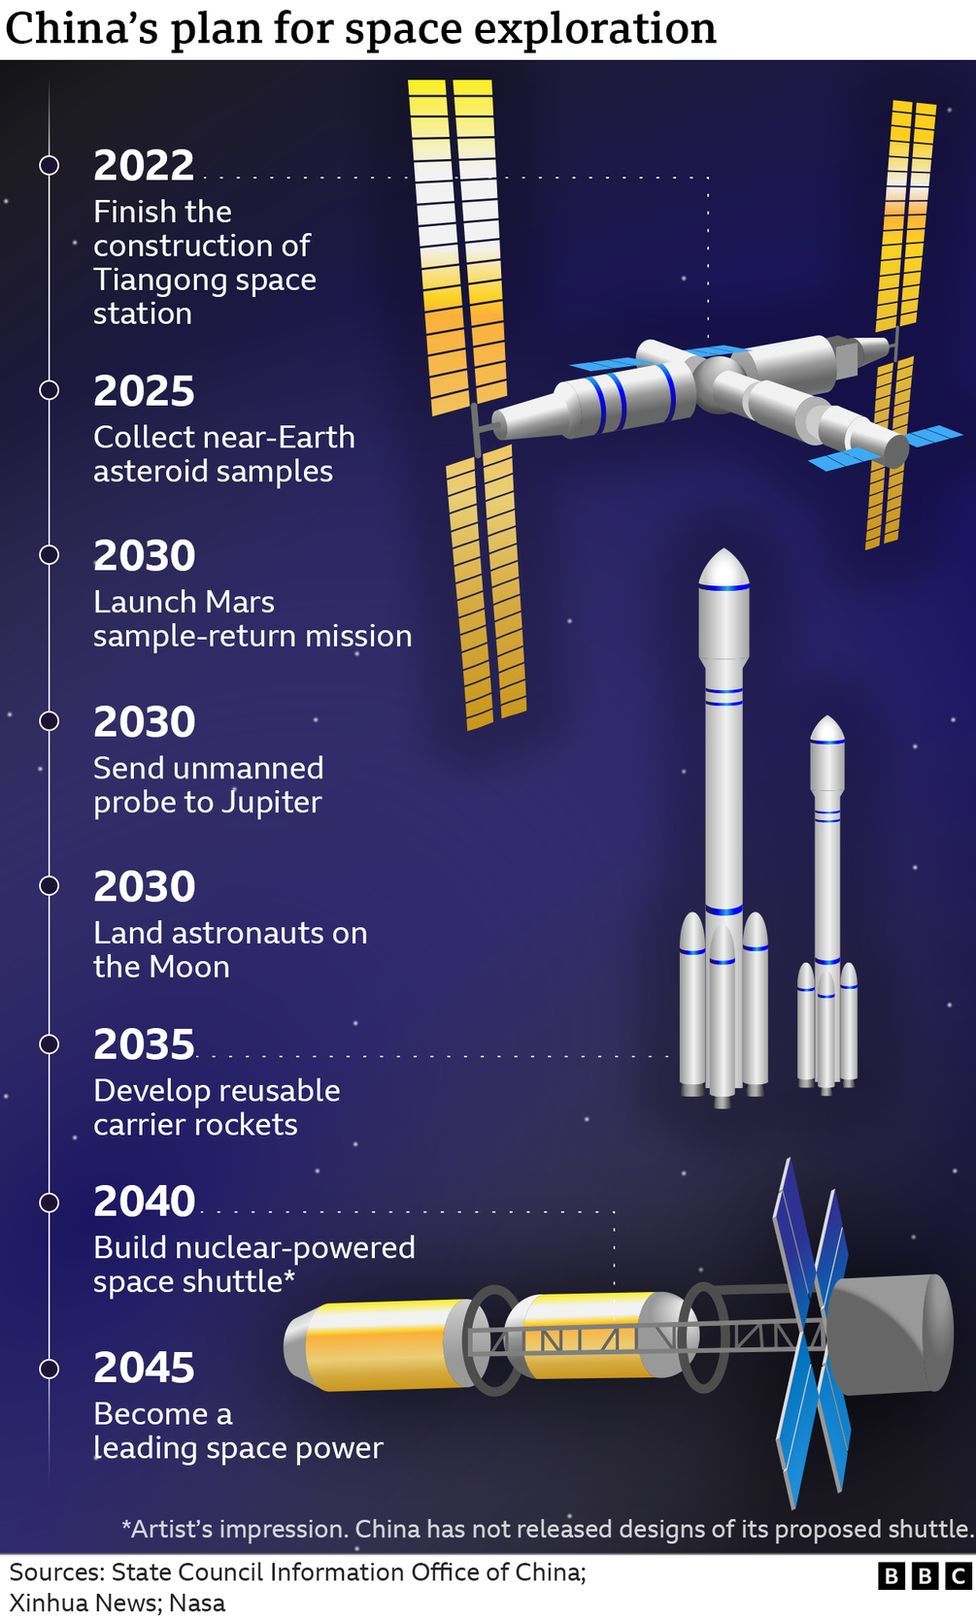 Graphic illustrating China's plan for space exploration